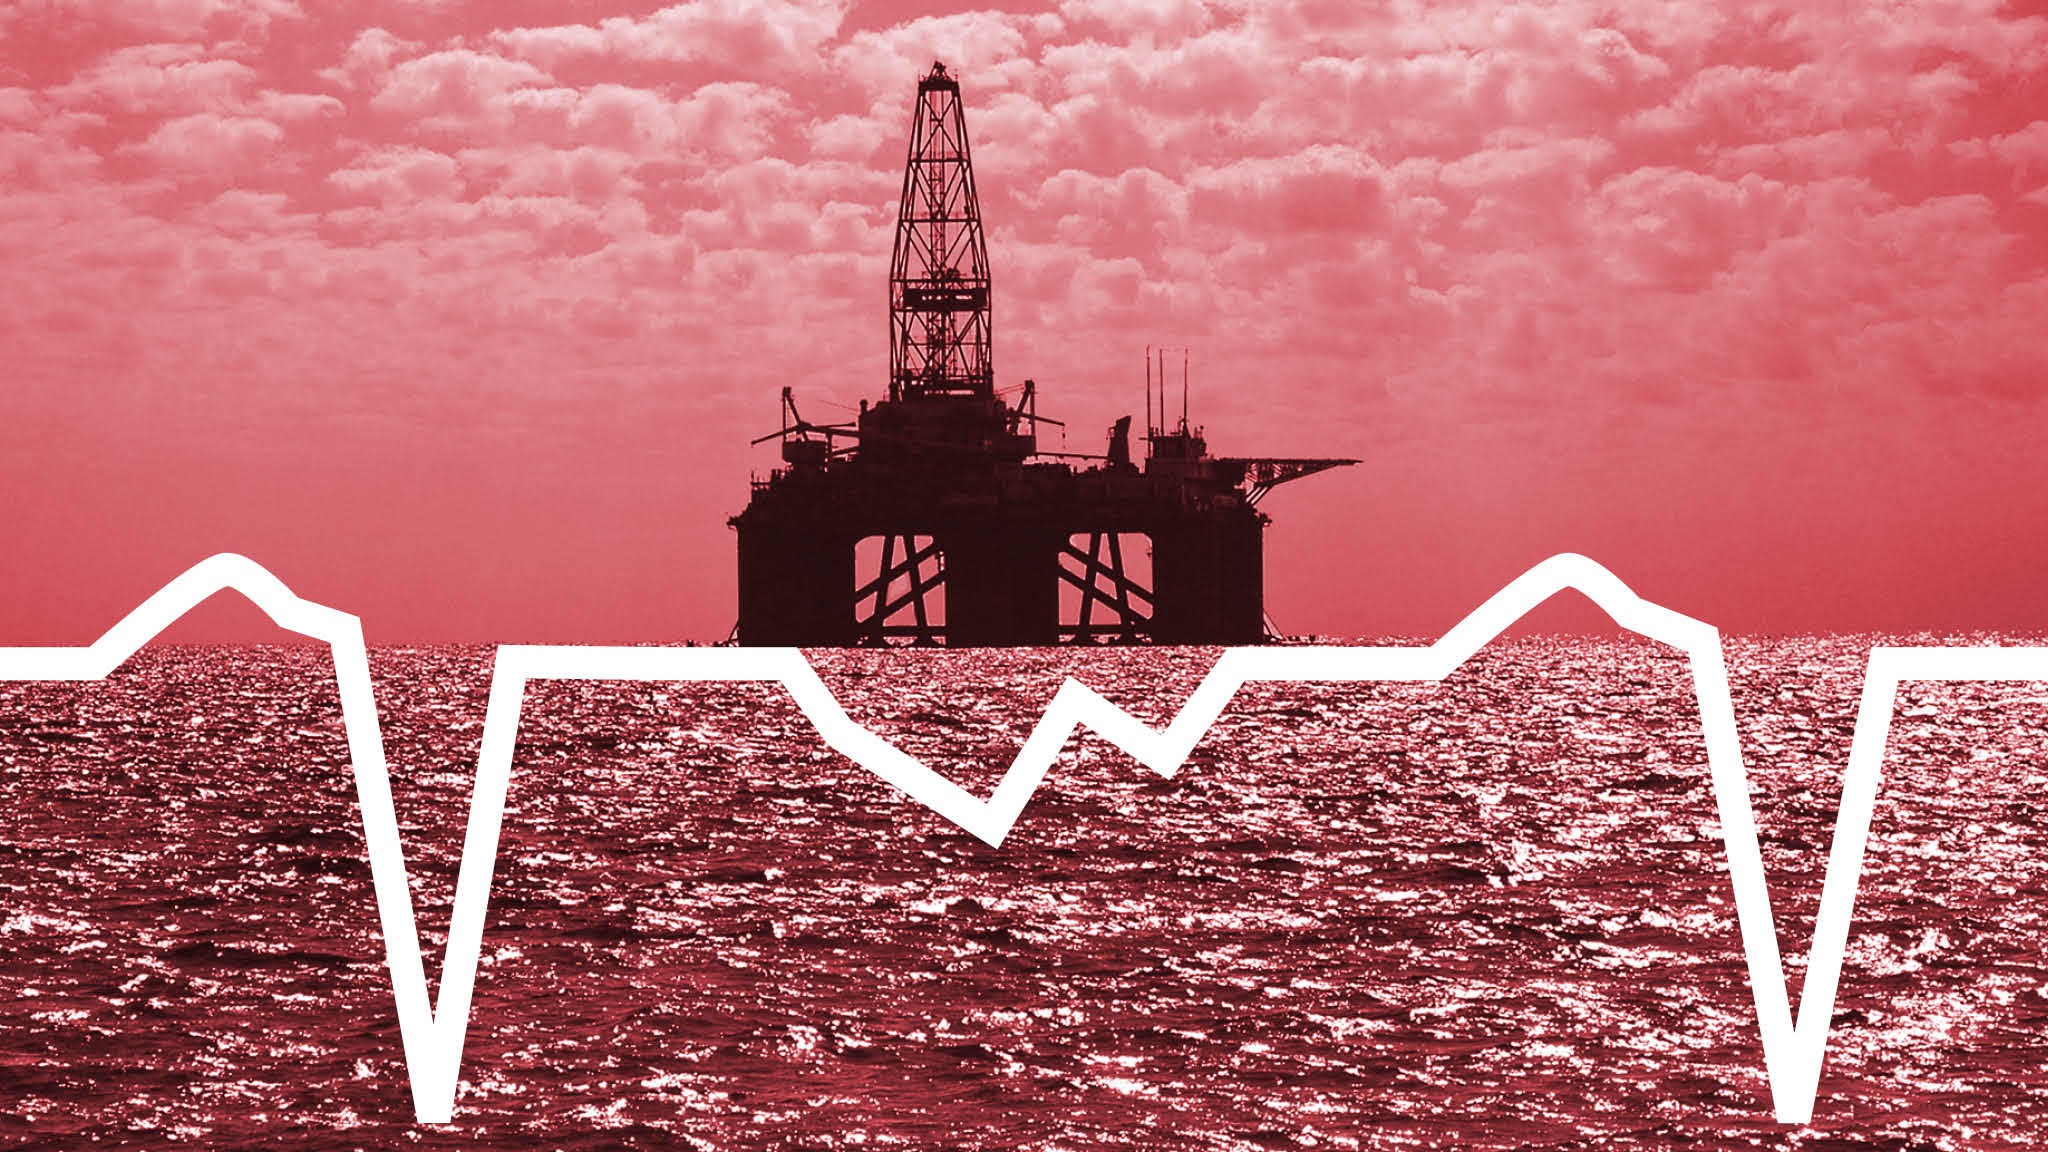 CFTC warns on return to negative oil prices | Financial Times